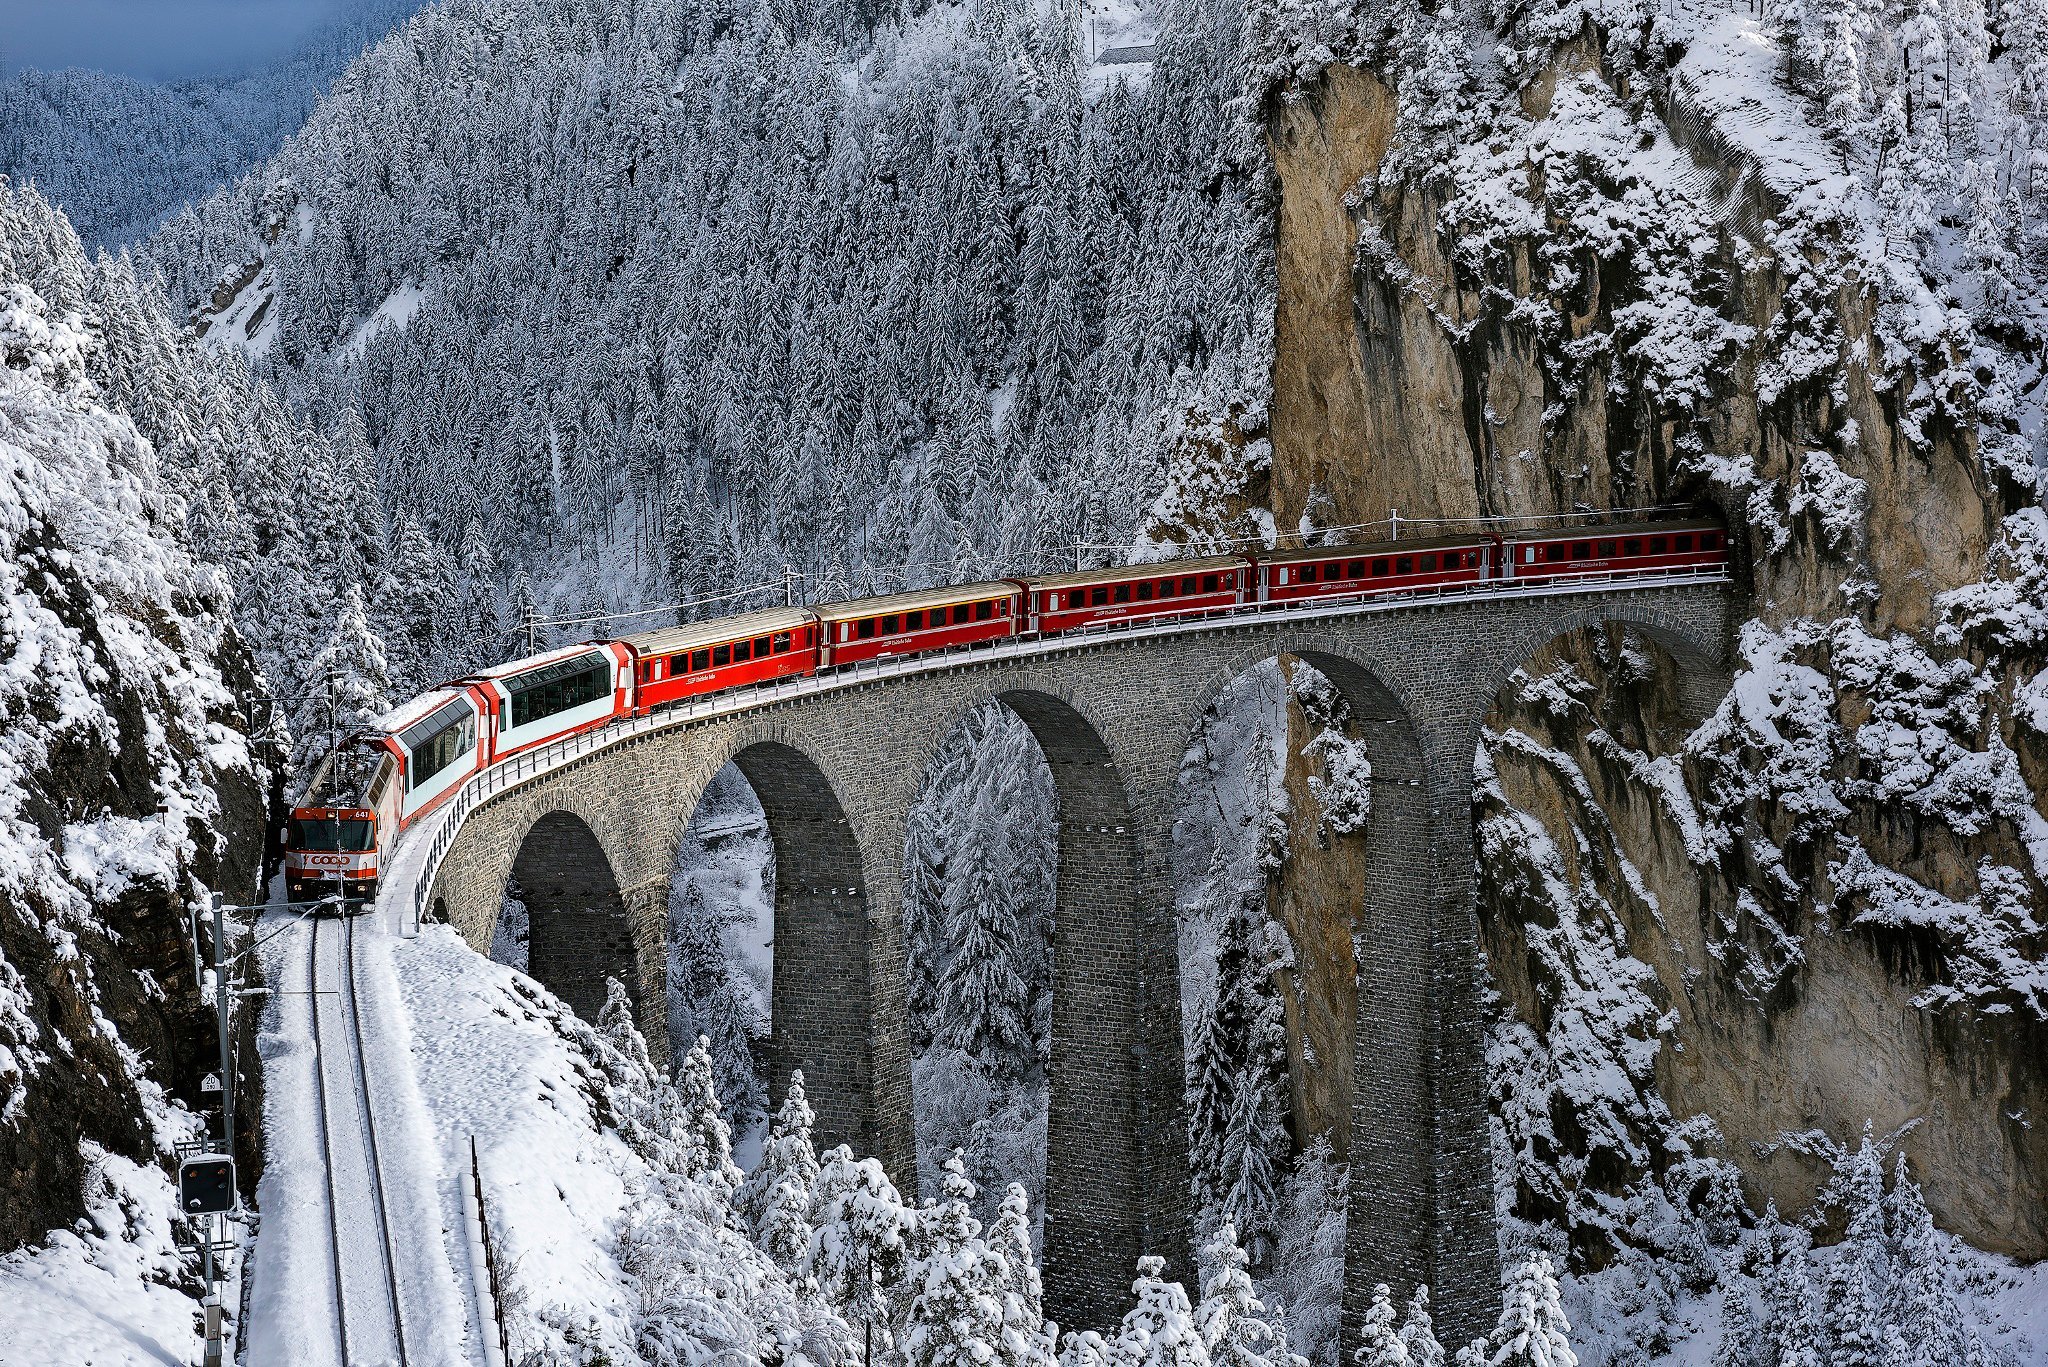 5 Stunning Winter Train Rides To Take From NYC - Secret NYC